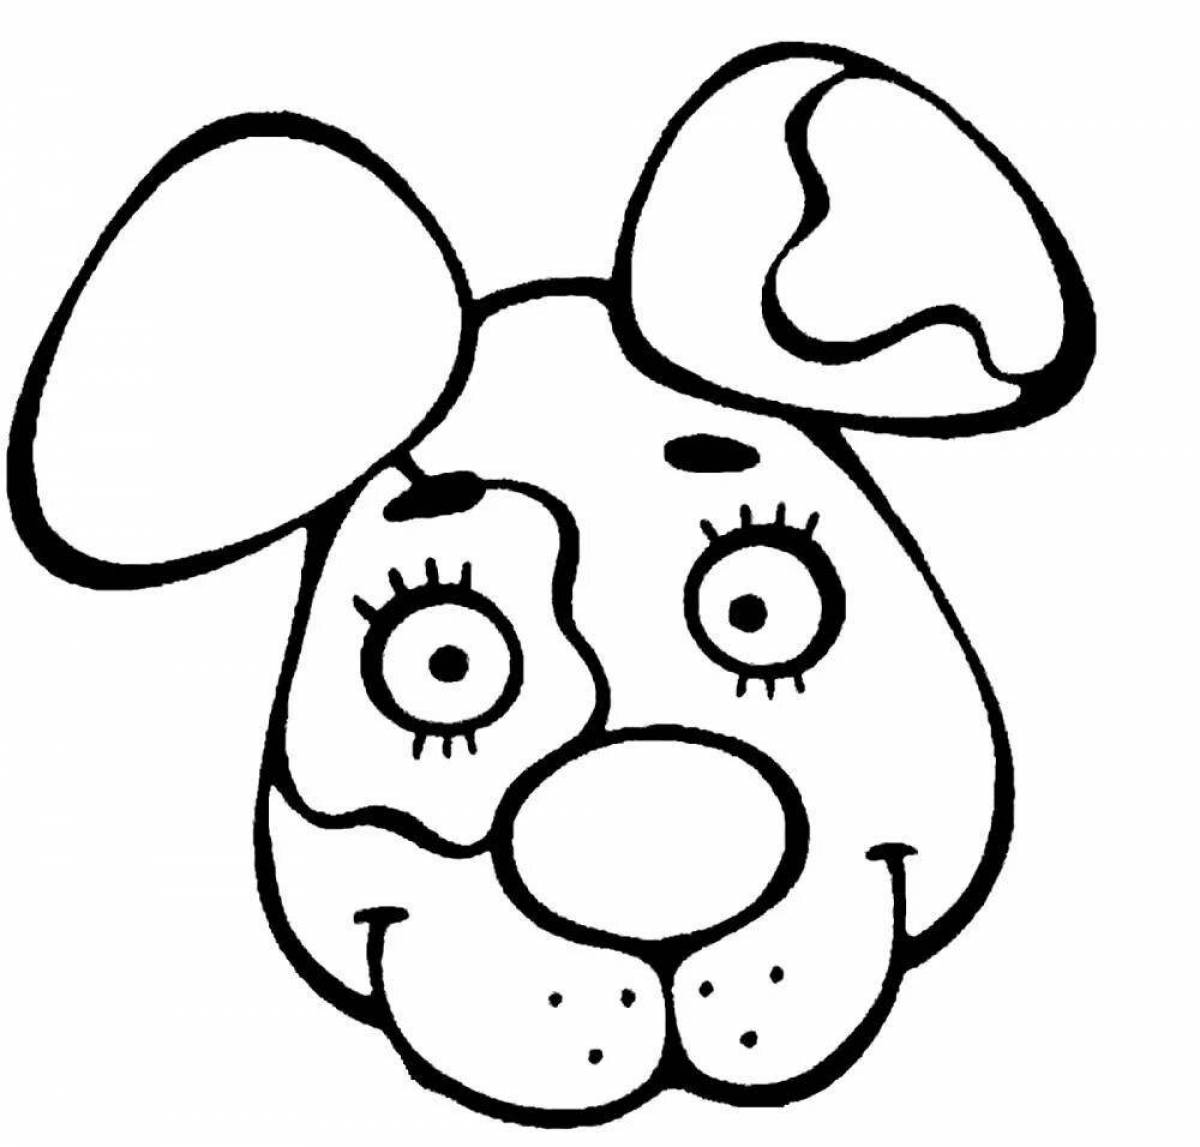 Animated animal coloring page